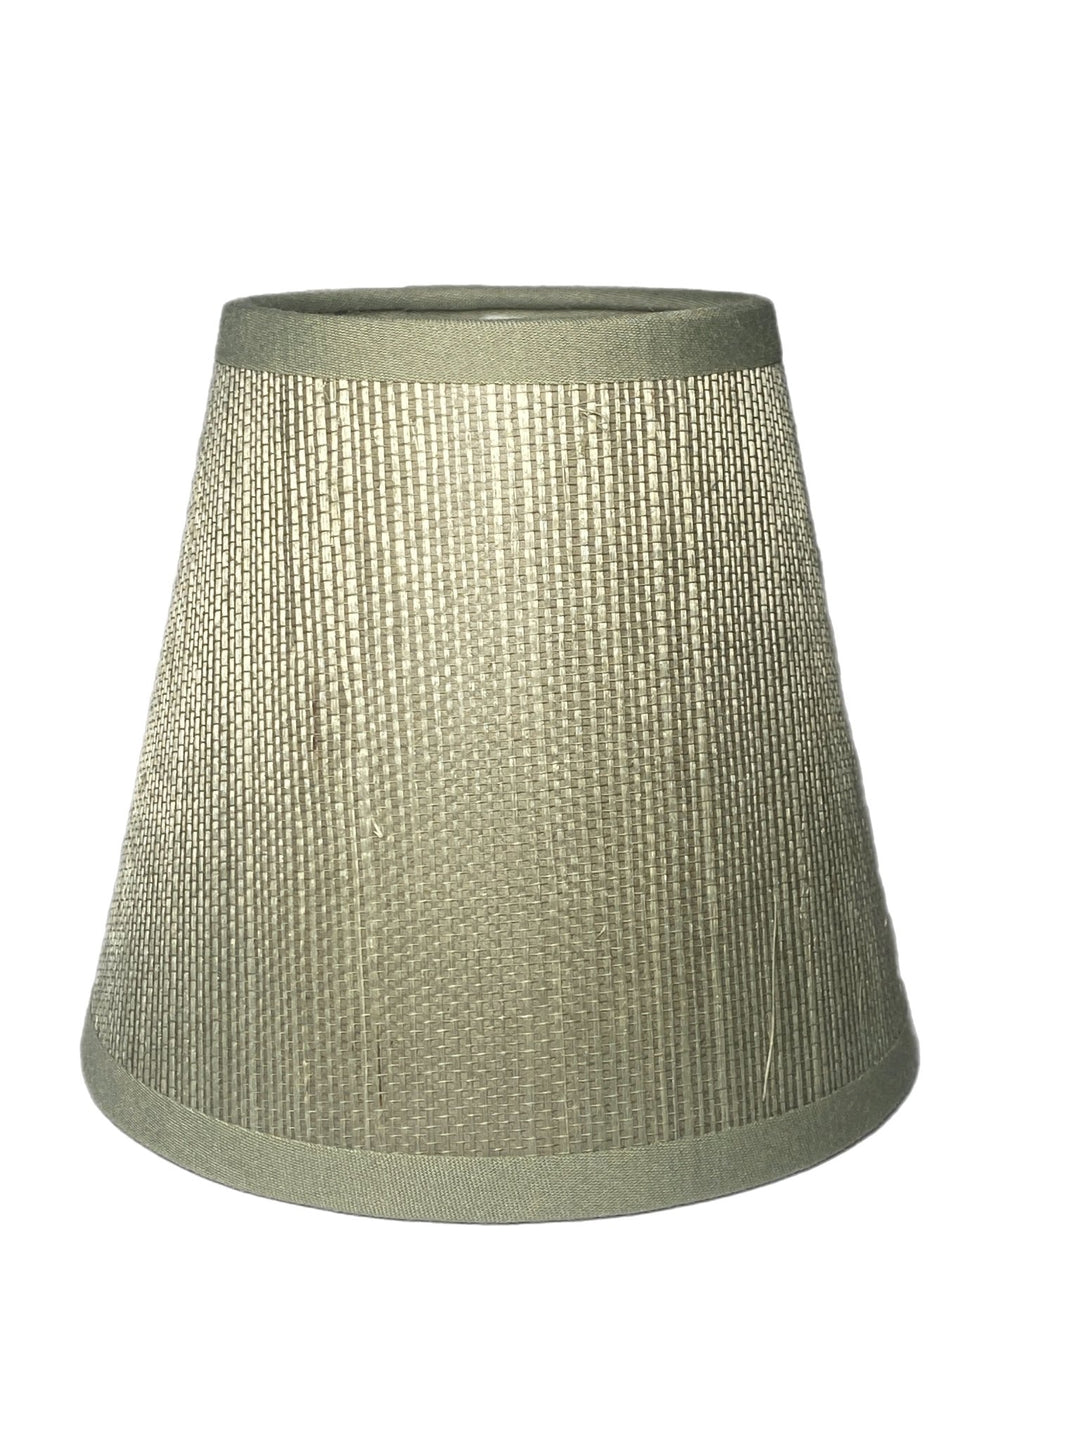 5" Pewter Grasscloth Empire Hardback Sconce Shade - Lux Lamp Shades